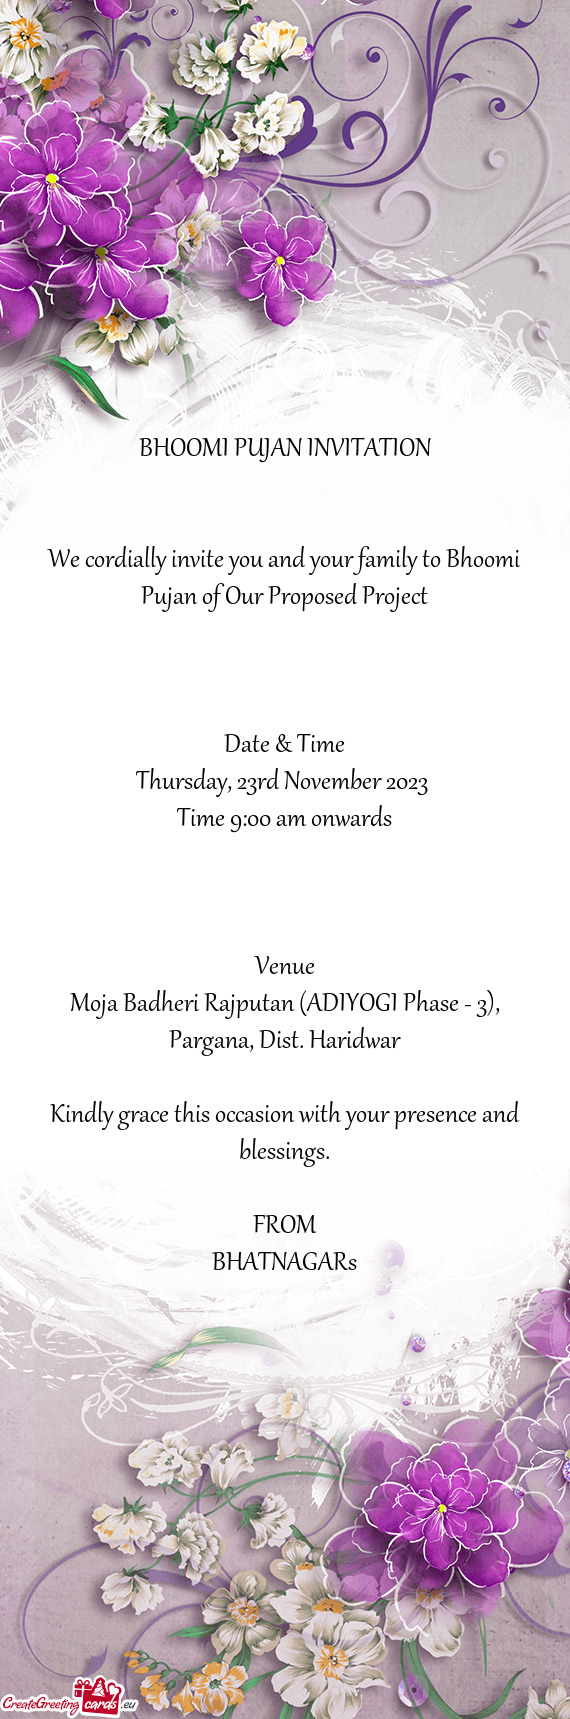 We cordially invite you and your family to Bhoomi Pujan of Our Proposed Project